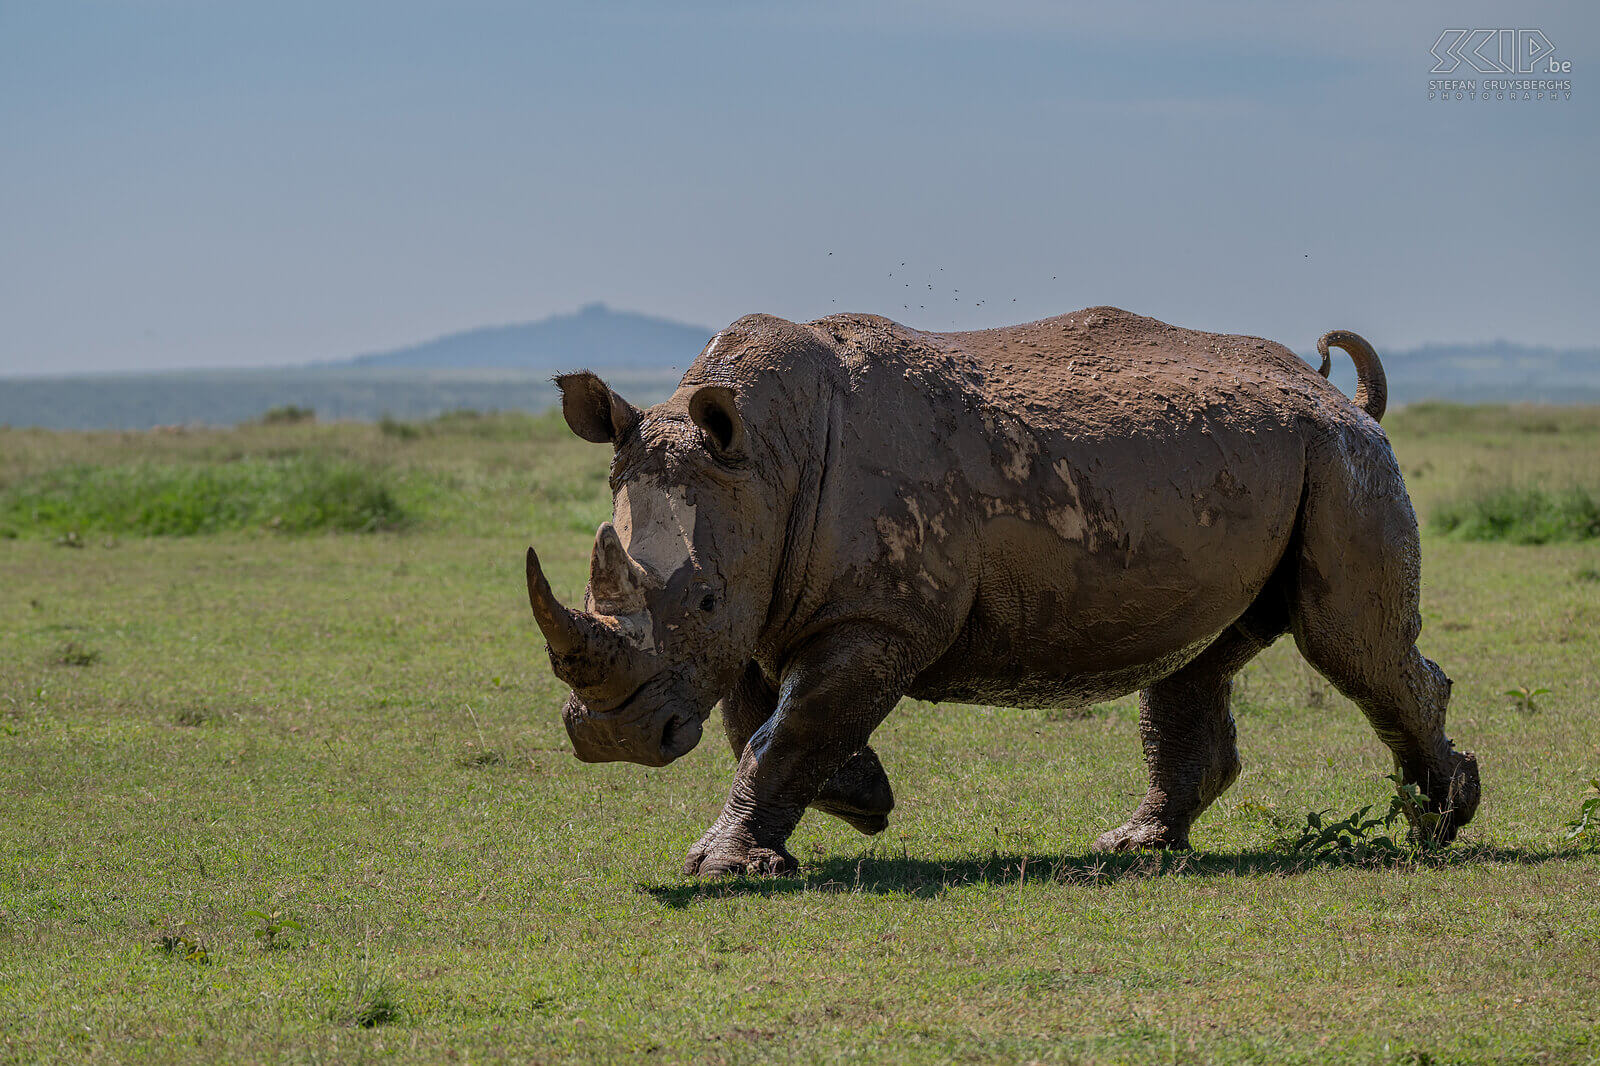 Solio - Southern white rhino White rhinos are also sometimes irritable and once we had to drive a little further quickly to avoid an attack by such a colossus. Stefan Cruysberghs